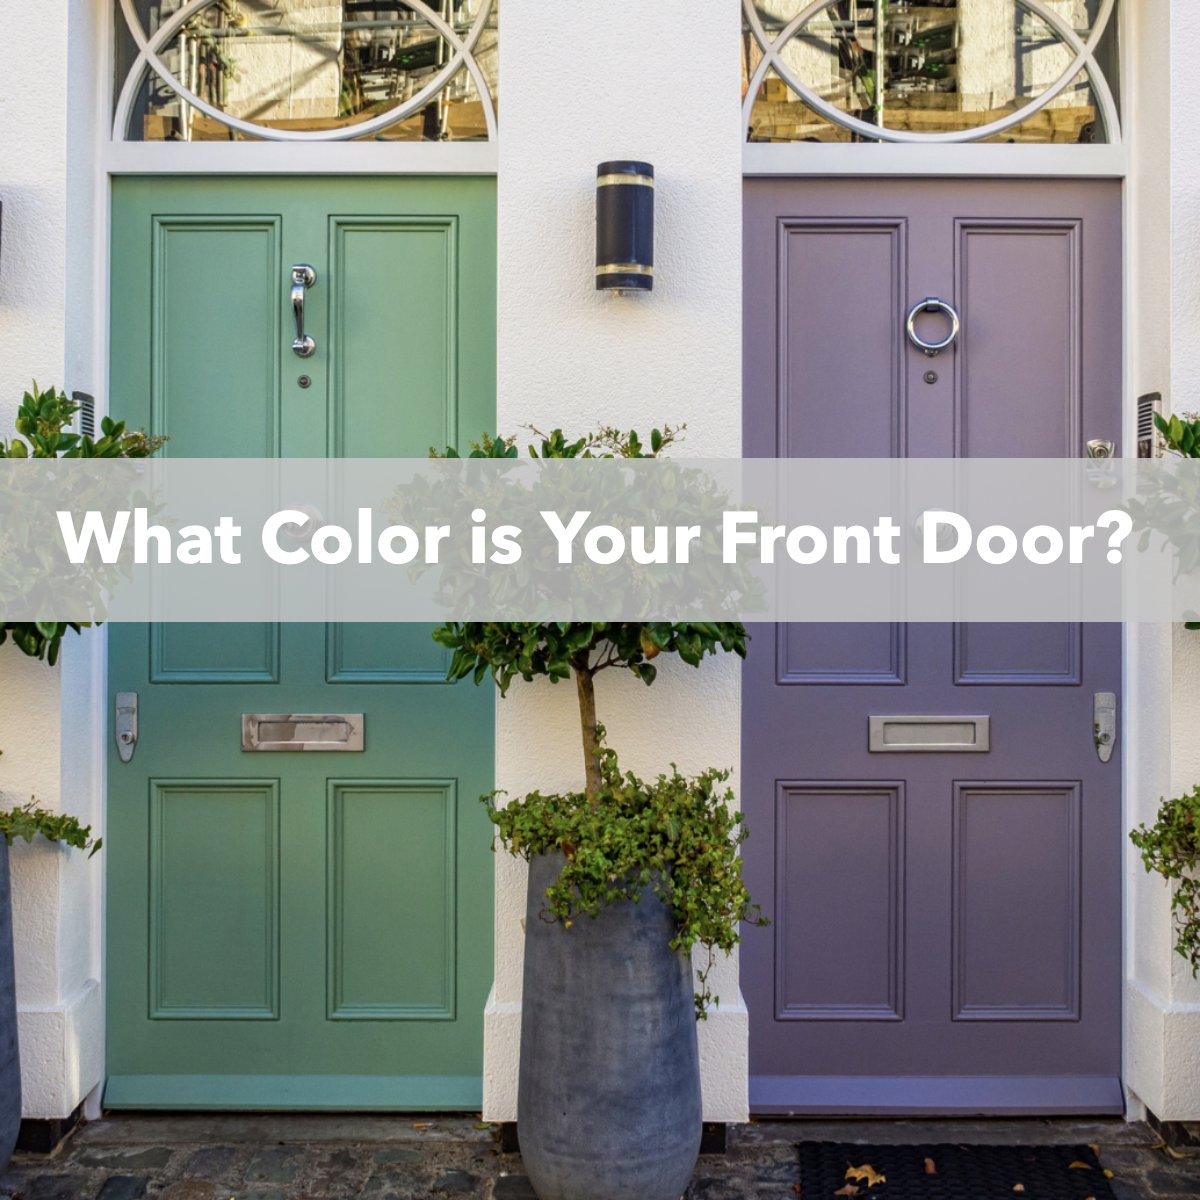 Did you select the color or did you just settle? 🤔

Tell us in the comments! 👇 

#questions #frontdoor #doorcolor #exterior #realestate
 #TroySage #Realtor #HomesForSale #RealEstate #RealEstateMarket #realestateinsider #RealEstateMarket